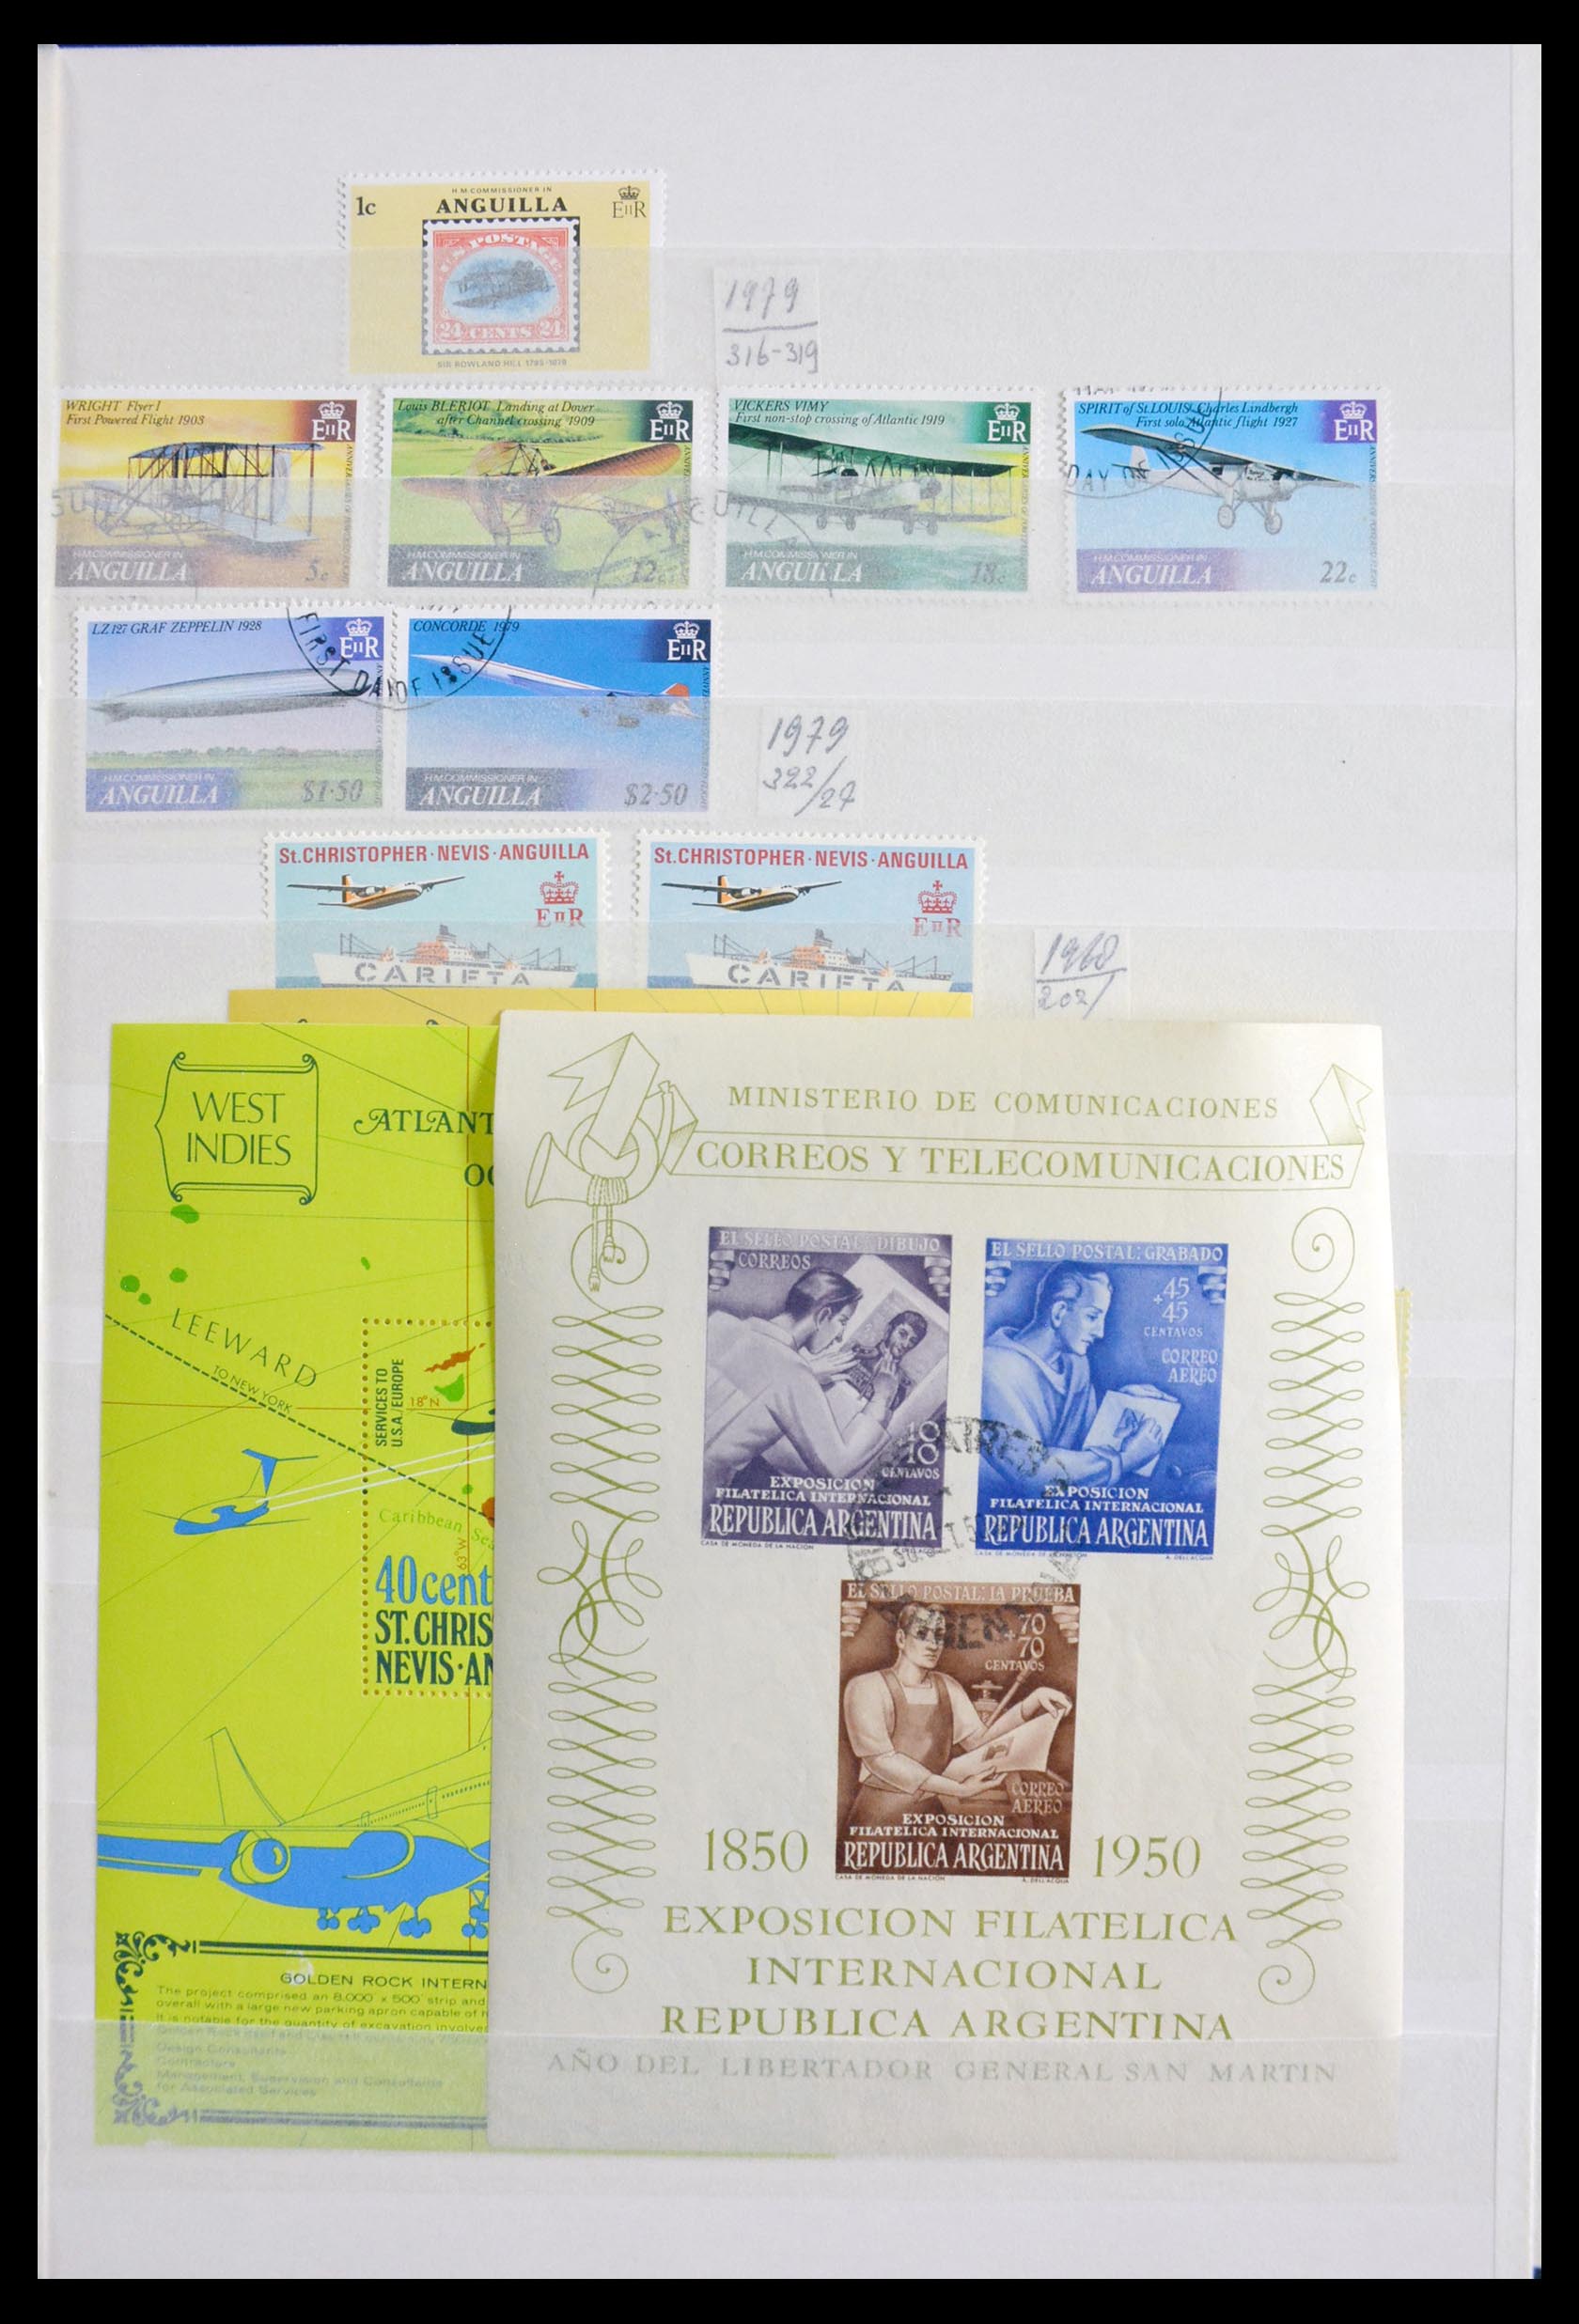 29917 011 - 29917 Latin America airmail stamps.